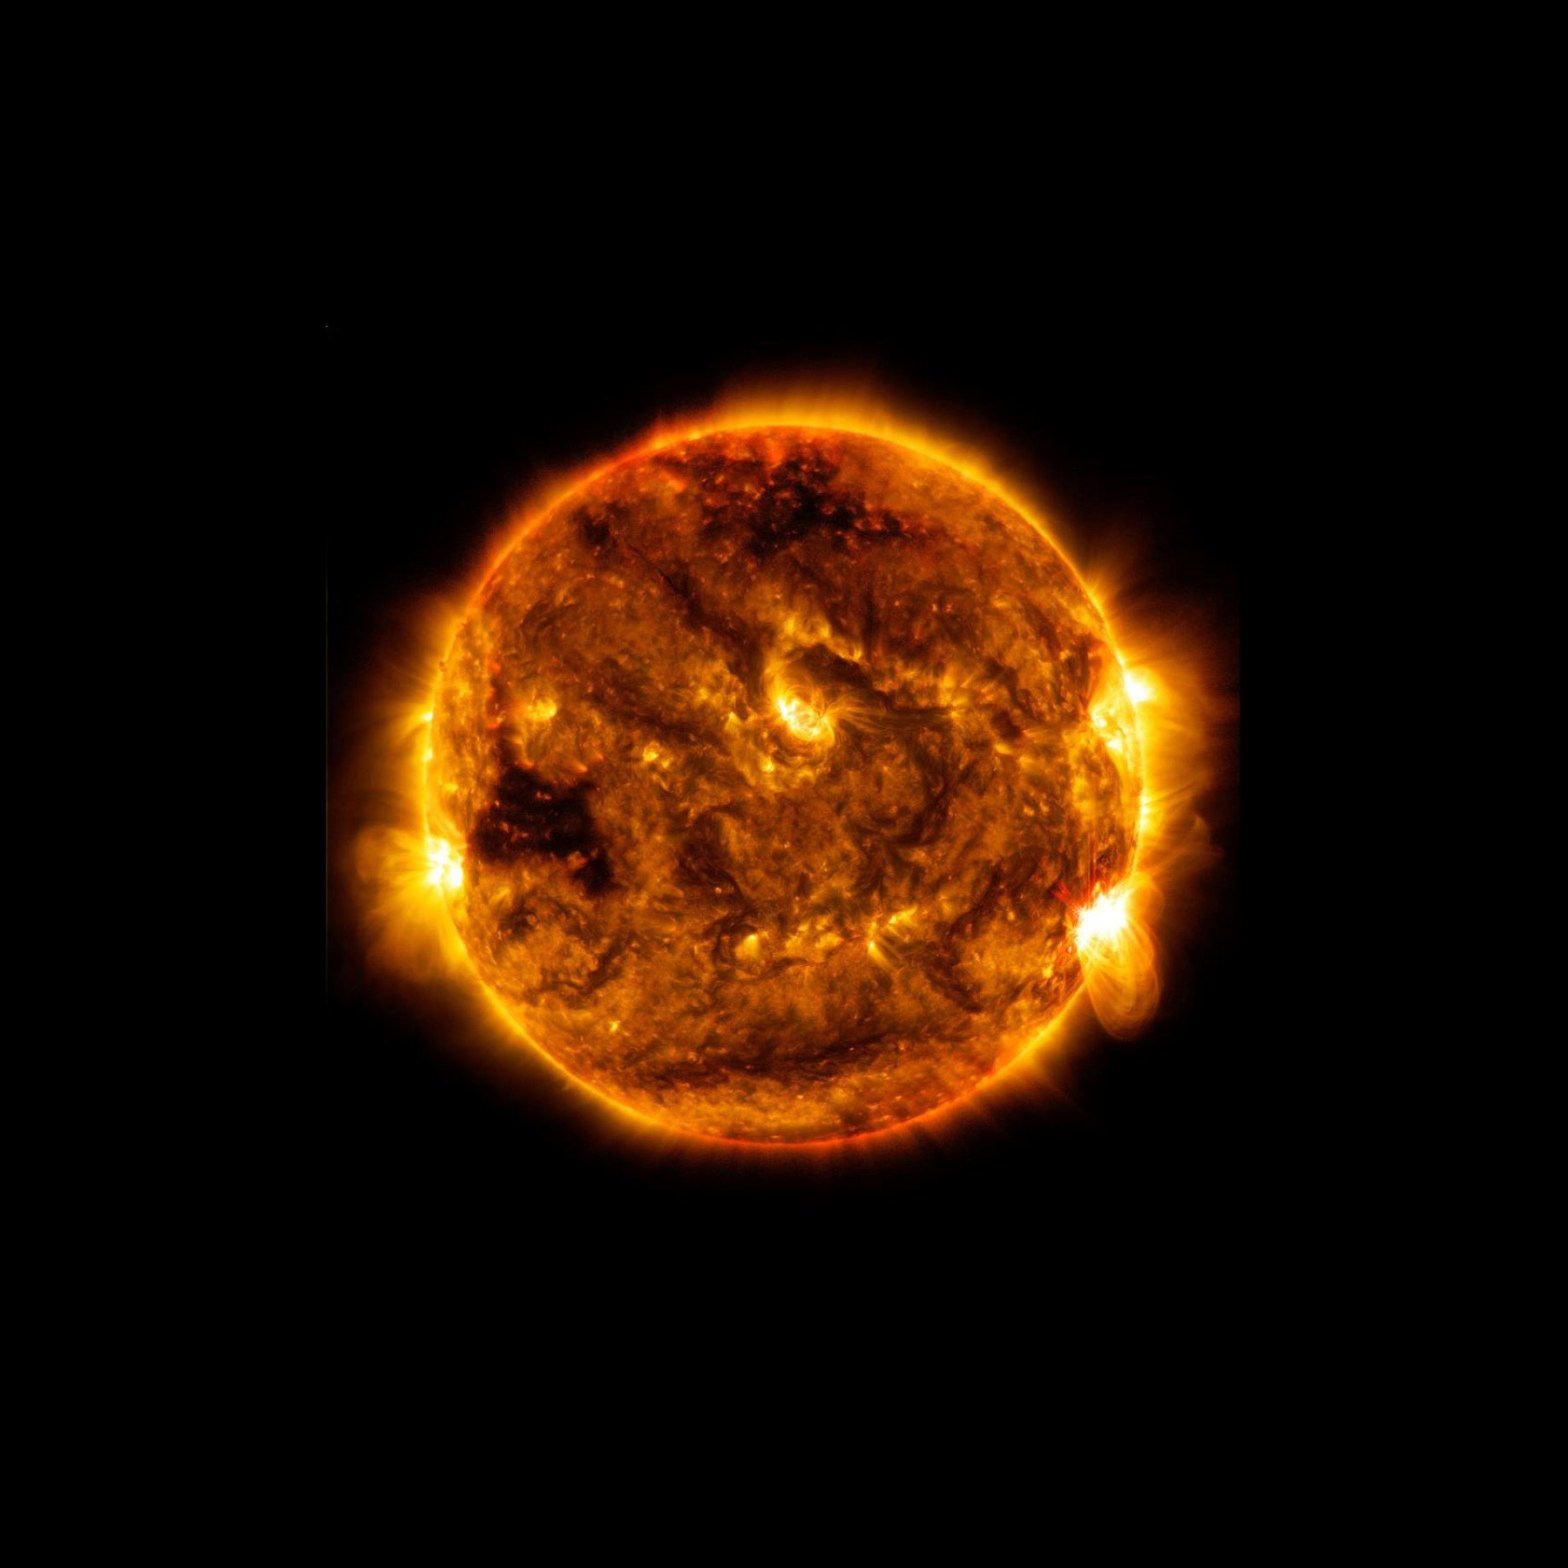 The Sun provides necessary energy for life on Earth, thanks to its powerful but compact core, which takes up just 1/50 our star’s volume.